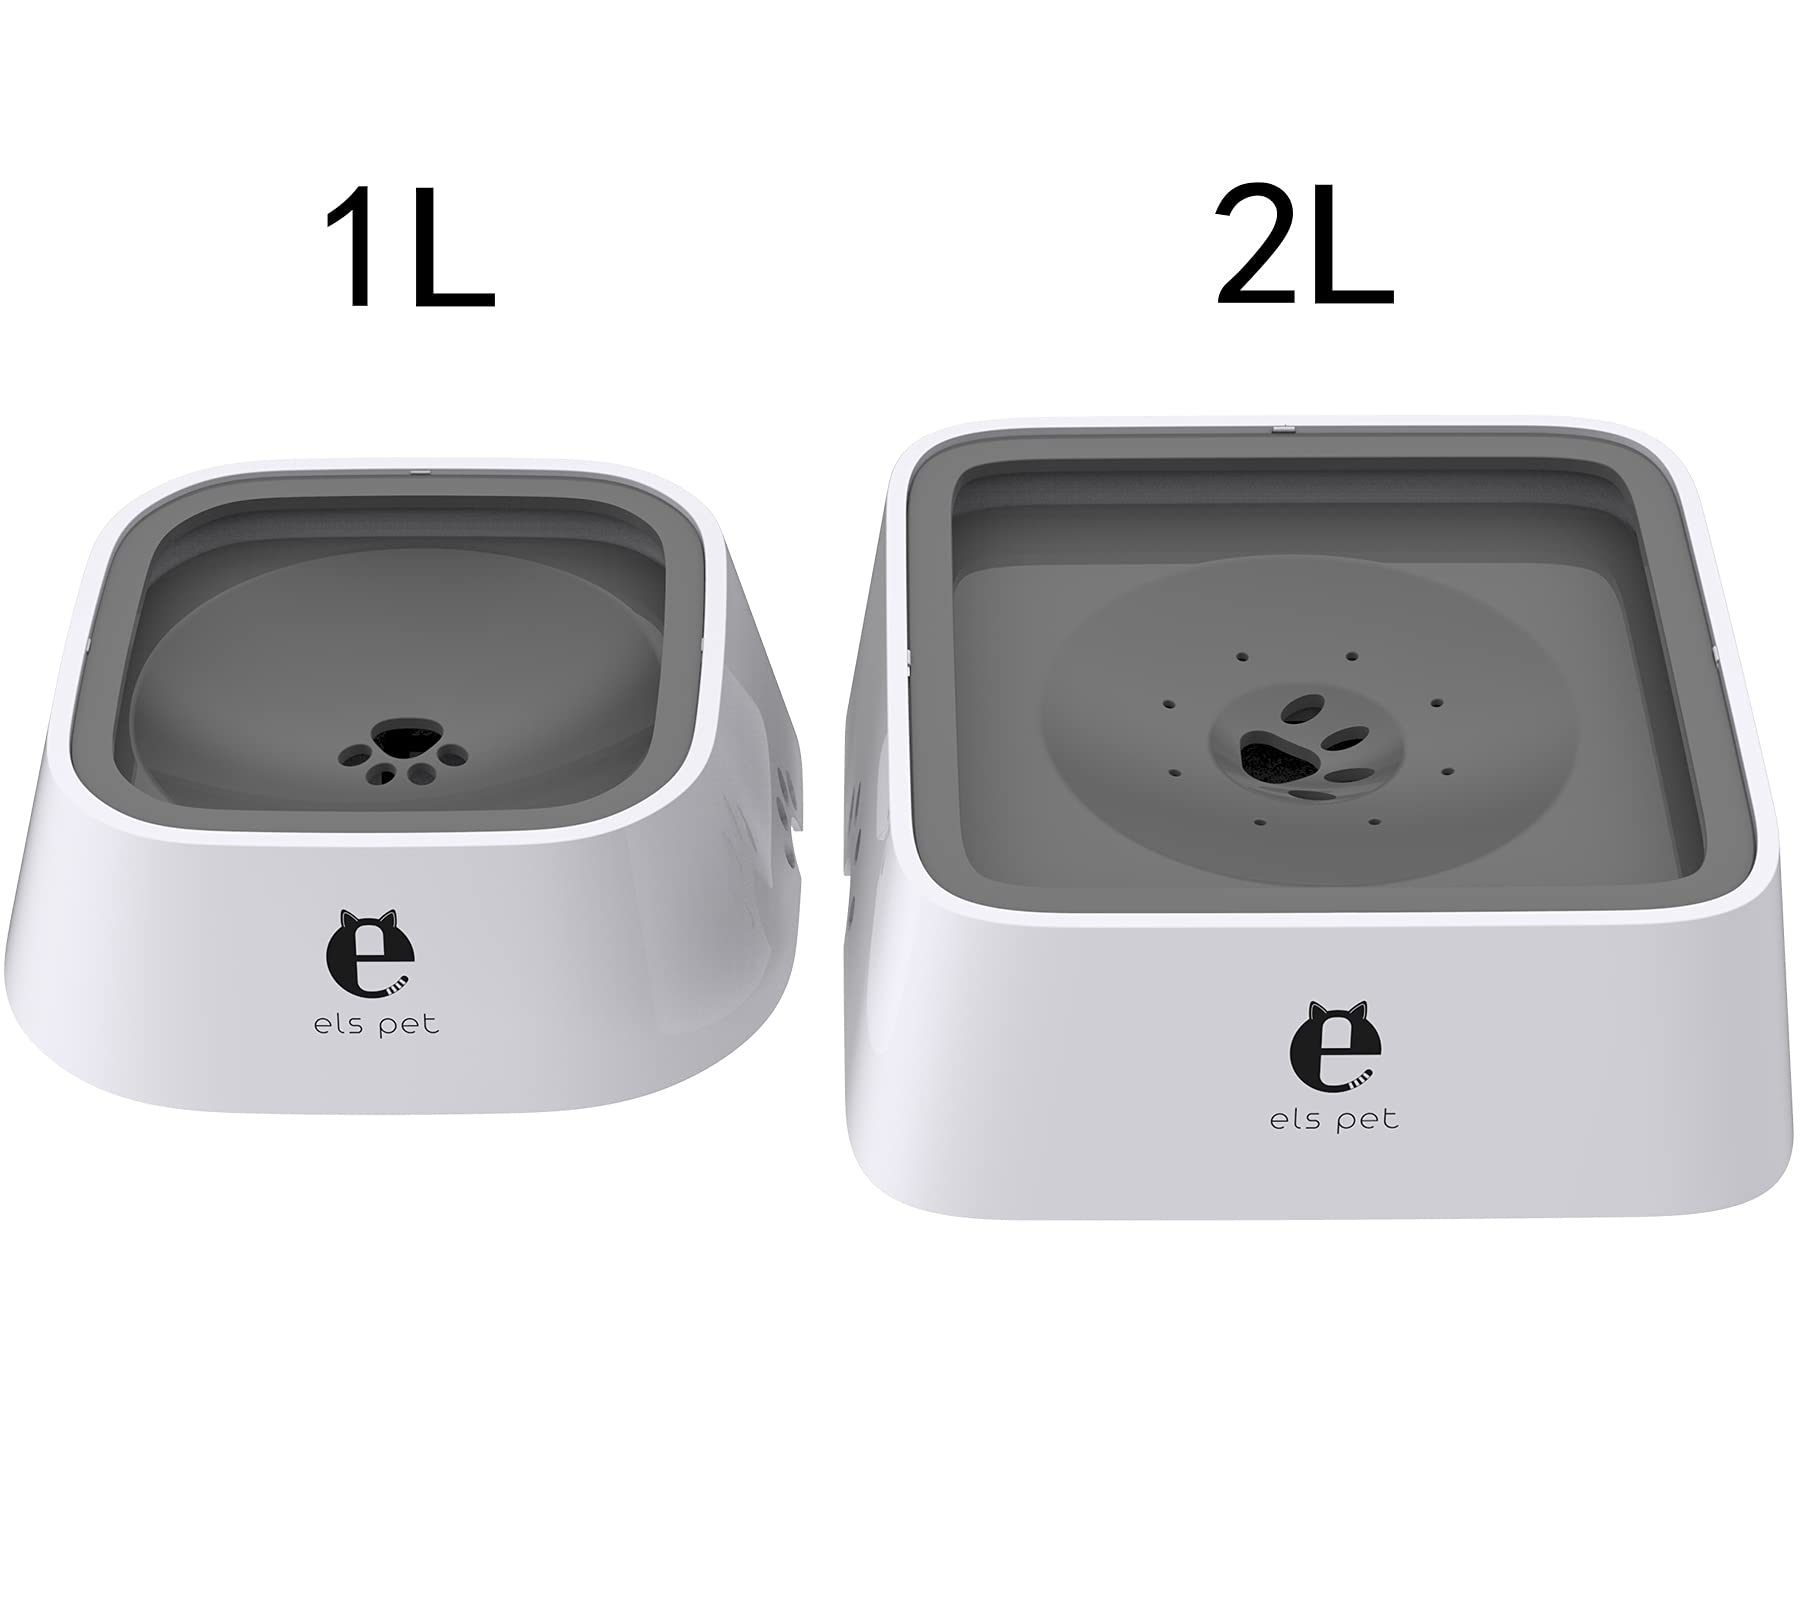 Els Pet No-Spill Water Bowl – Alpenglow Provisions